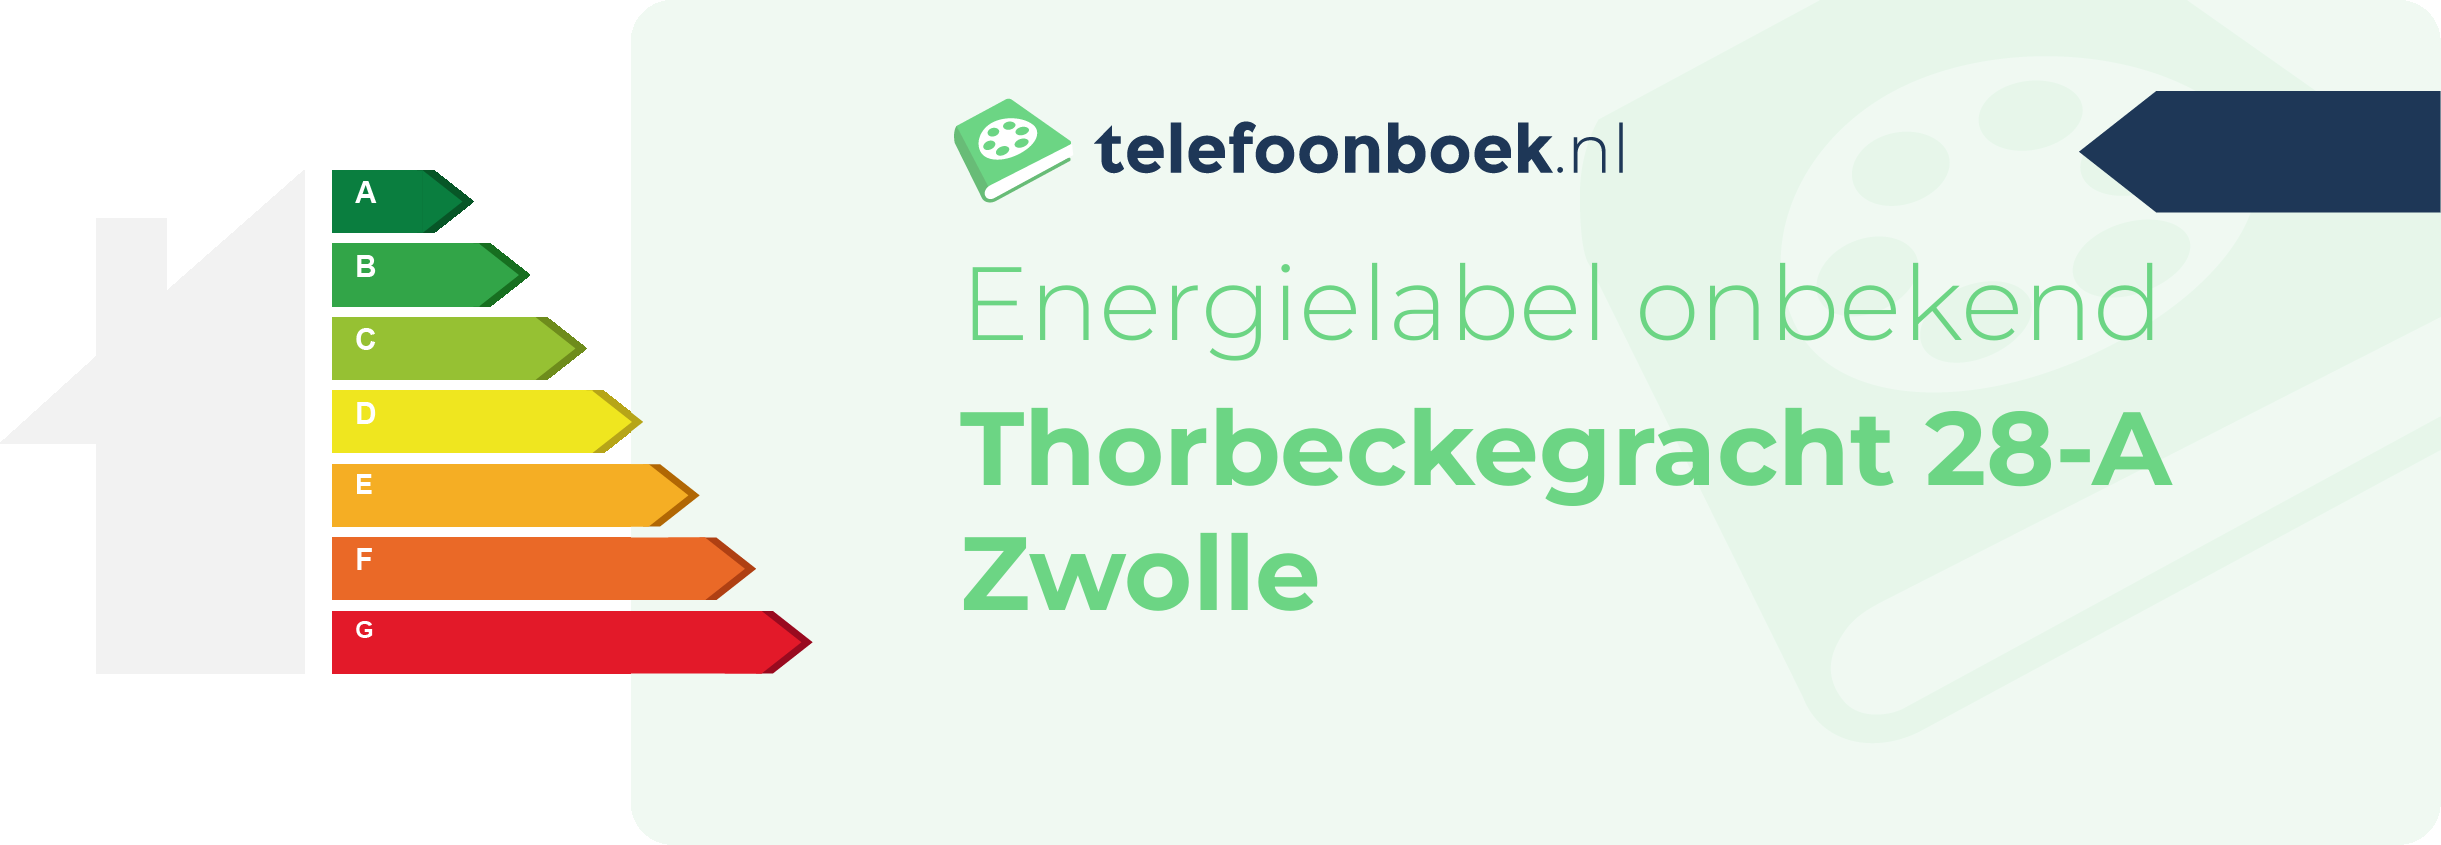 Energielabel Thorbeckegracht 28-A Zwolle